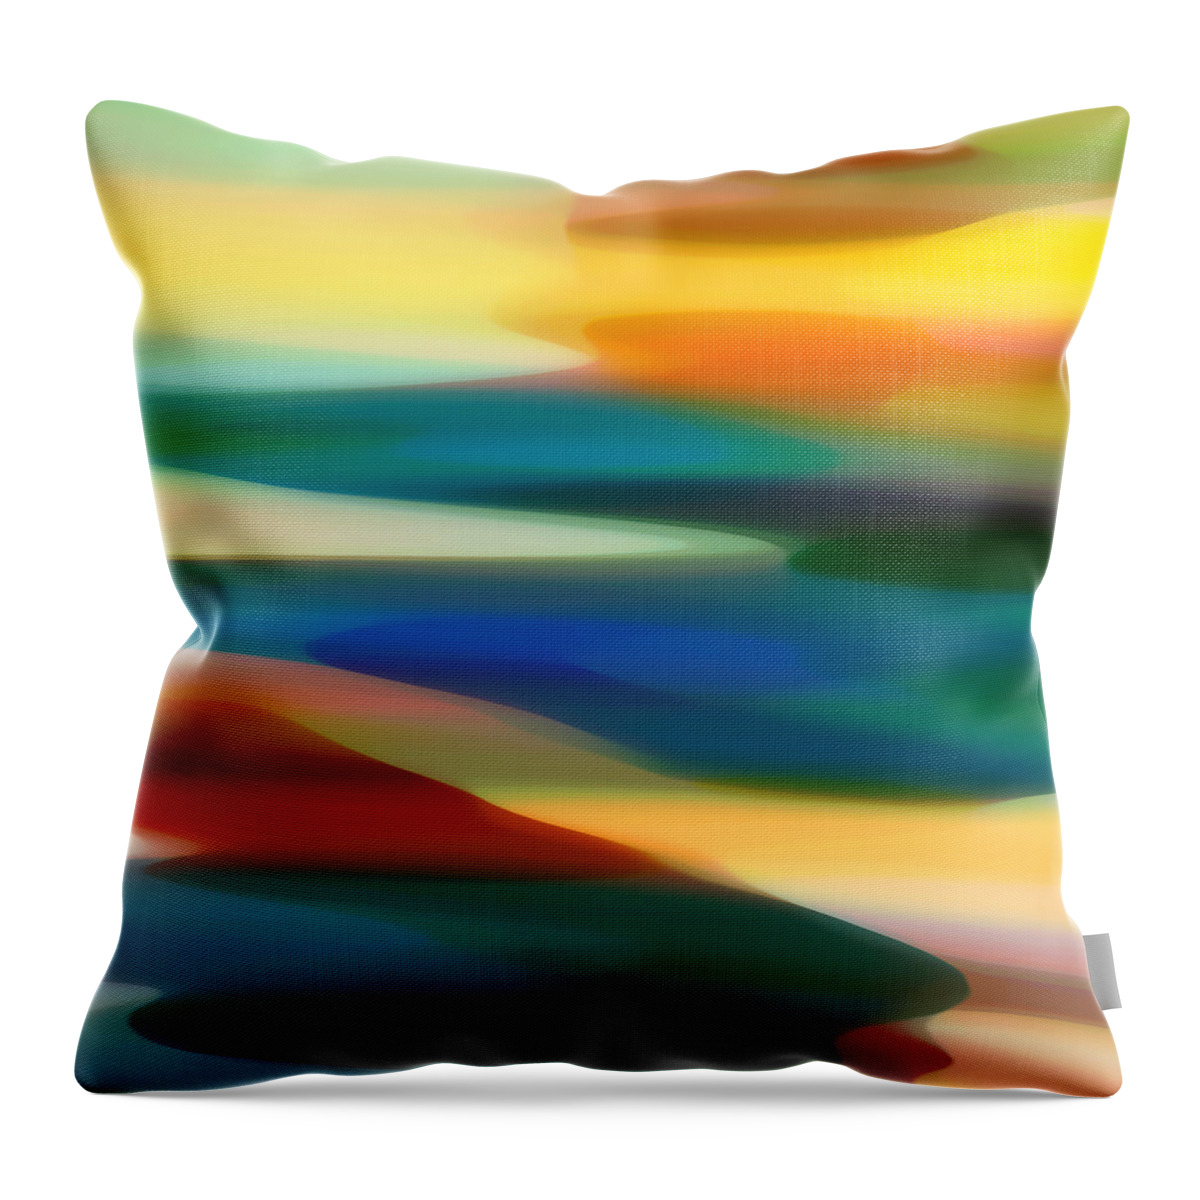 Fury Throw Pillow featuring the painting Fury Seascape 5 by Amy Vangsgard